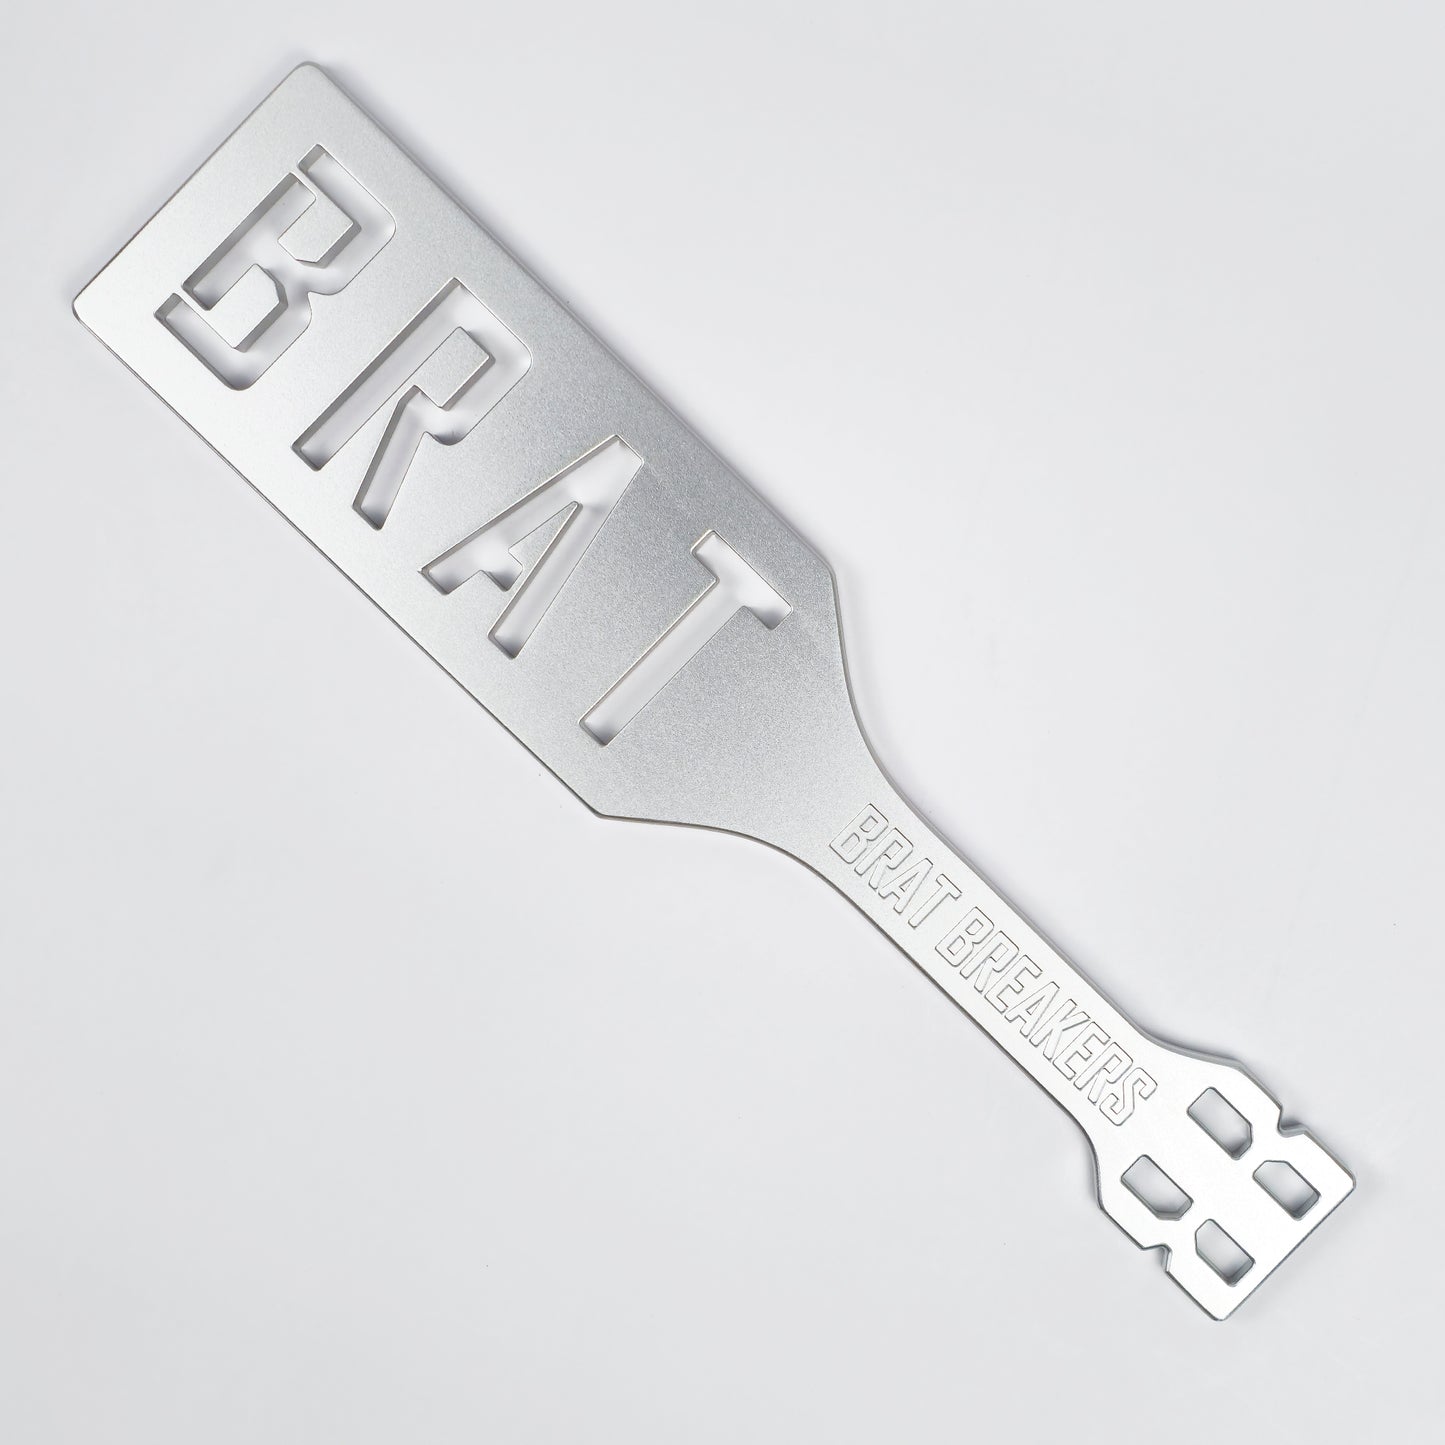 Silver teel Spanking Paddle with BRAT cut out made by Brat Breakers